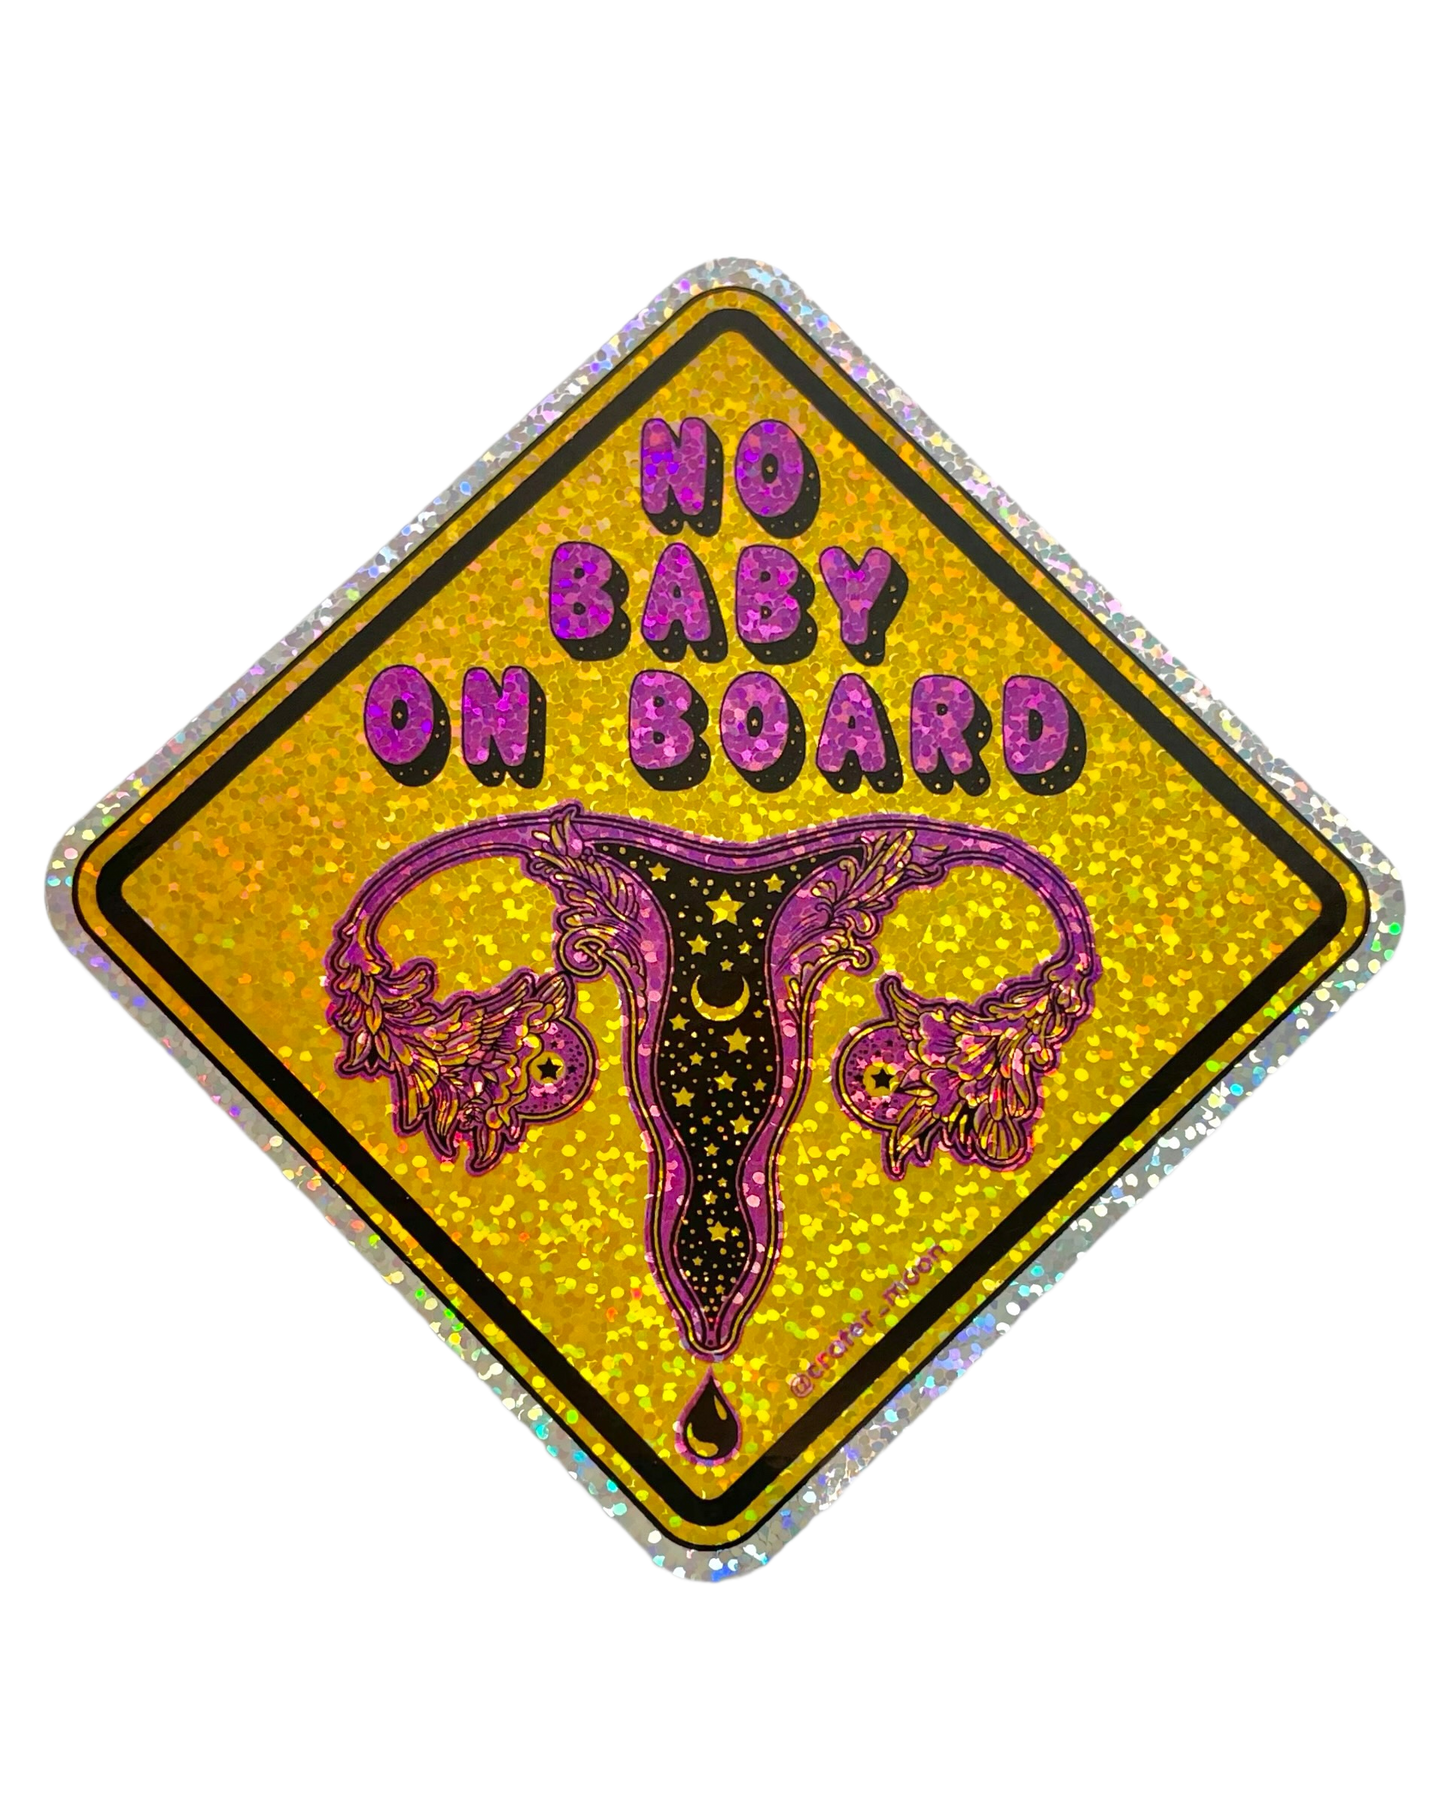 NEW 5" Glitter Foil "No Baby On Board" with Space Uterus Sticker by Crater Moon